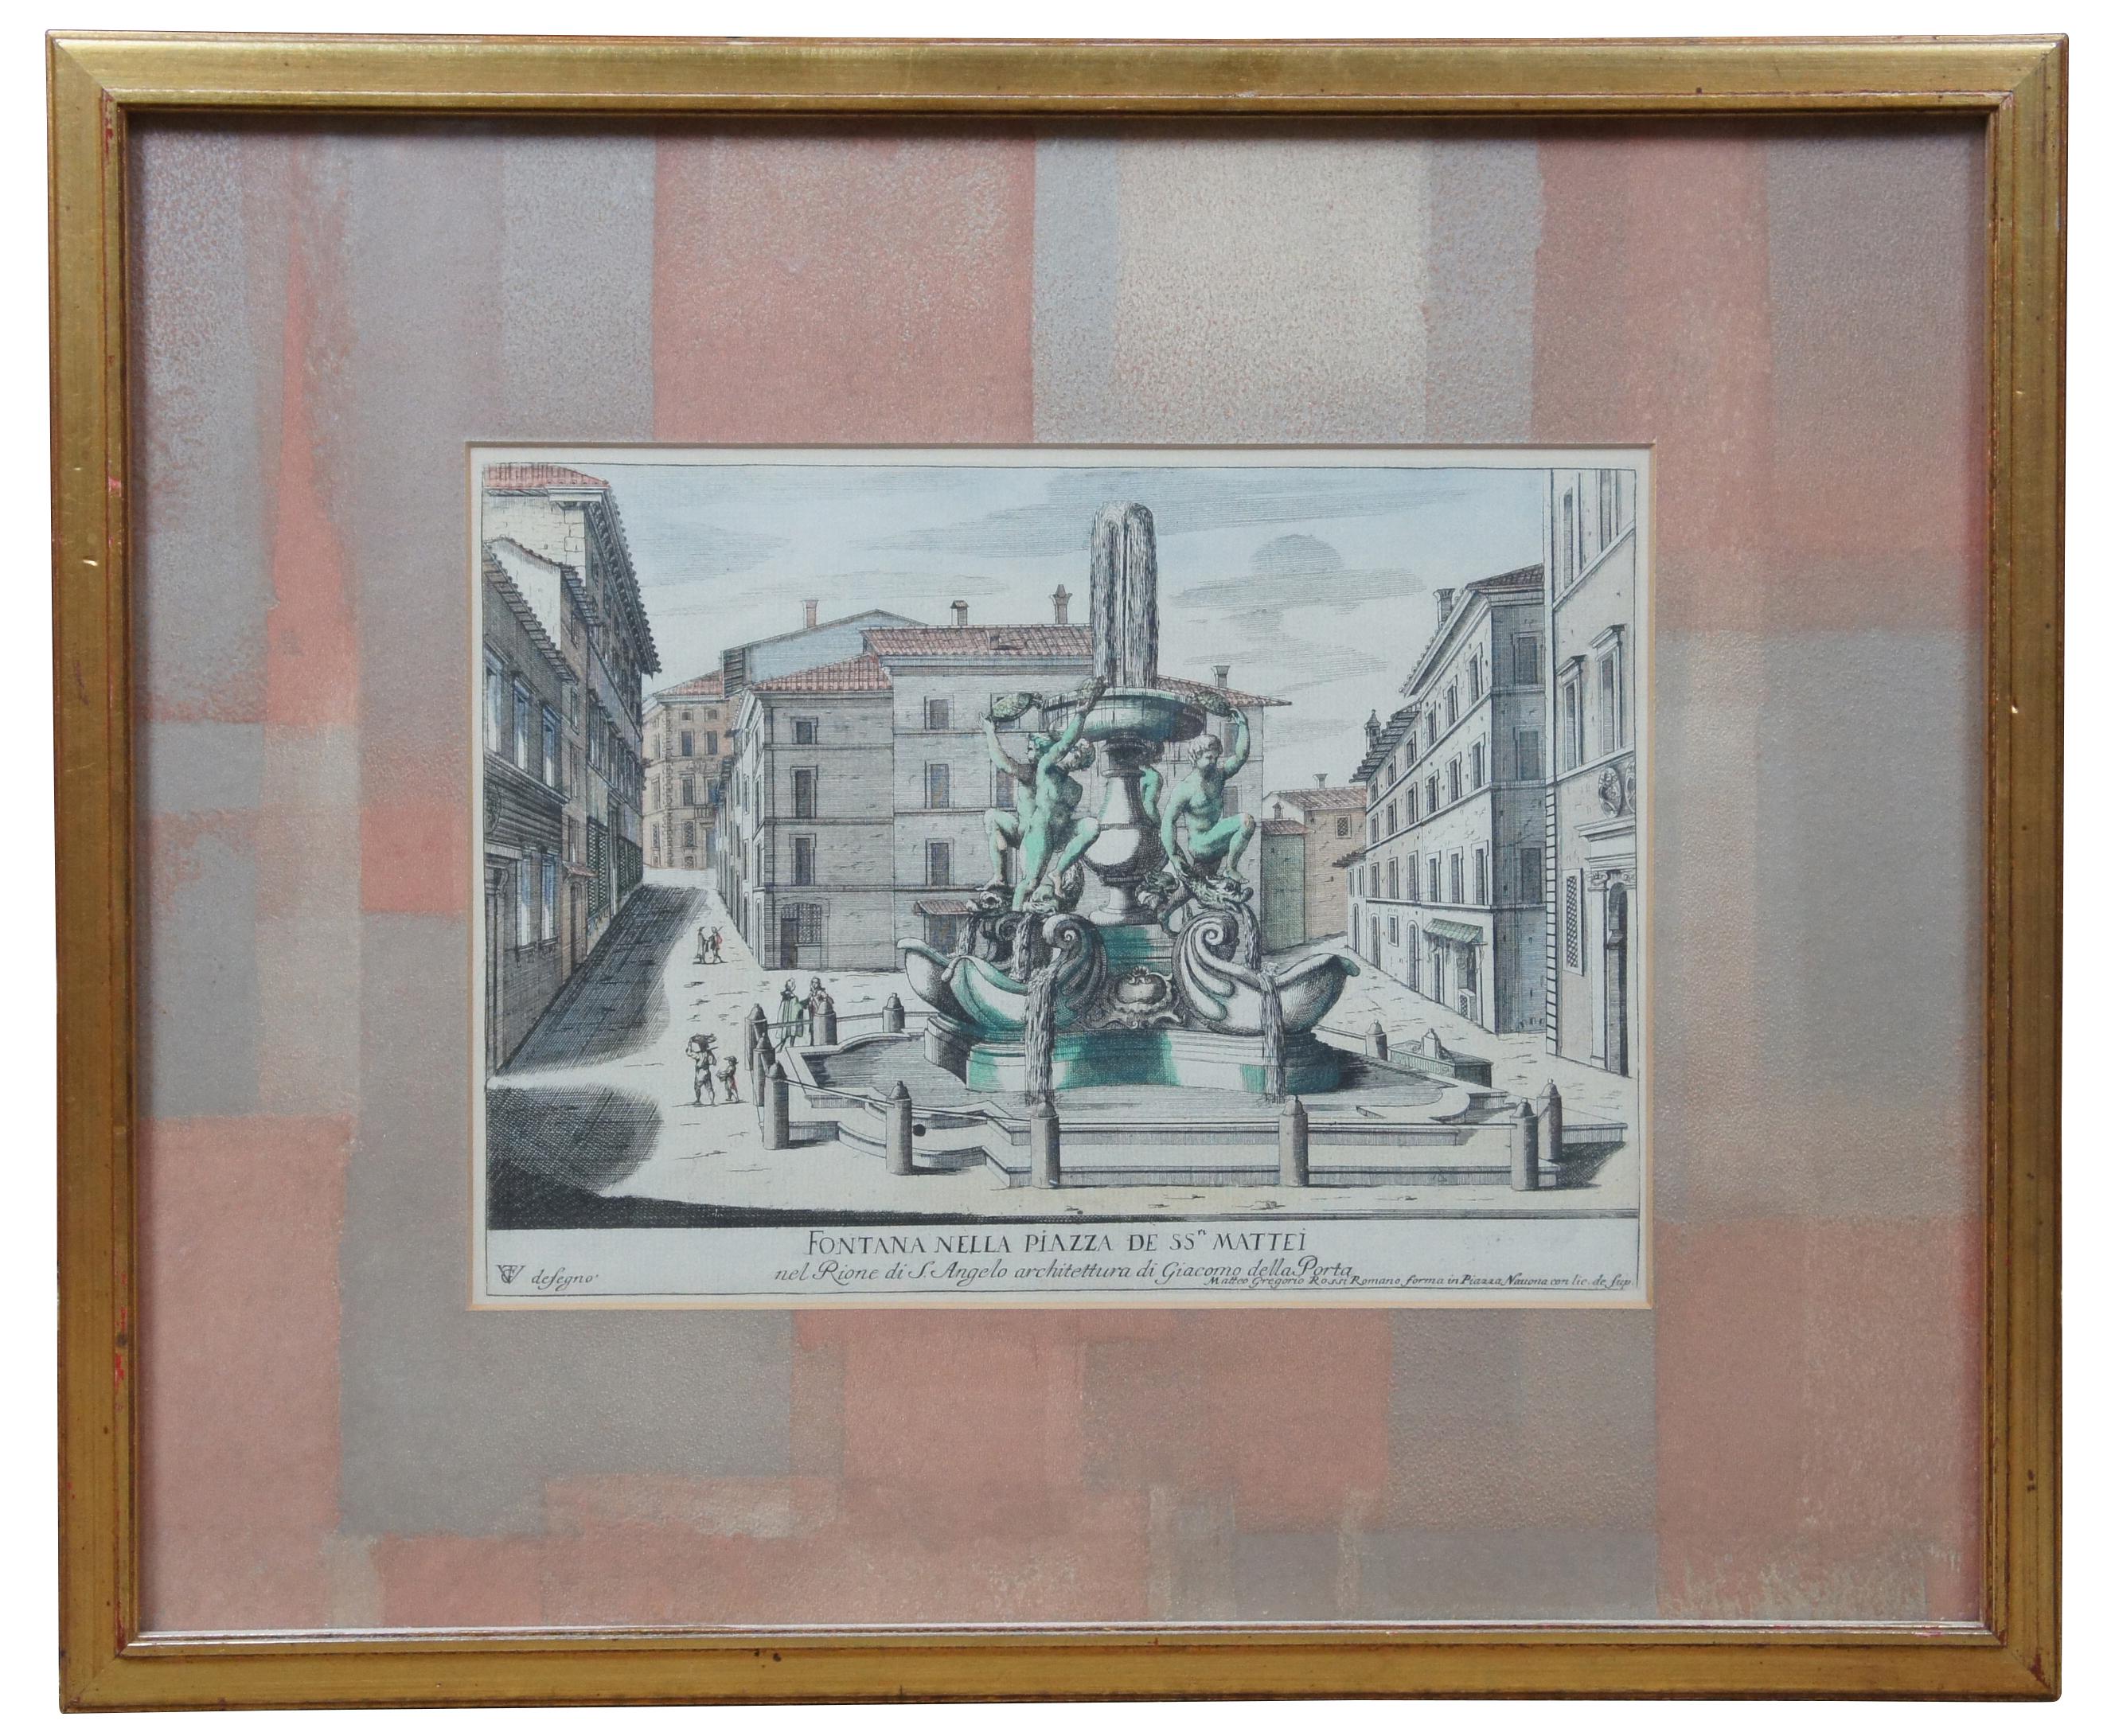 Set of two antique colored engravings featuring some of the Splendors of Rome – One city street featuring the Church of Saint Andrea and one showing The Turtle Fountain in the Piazza Mattei.
  